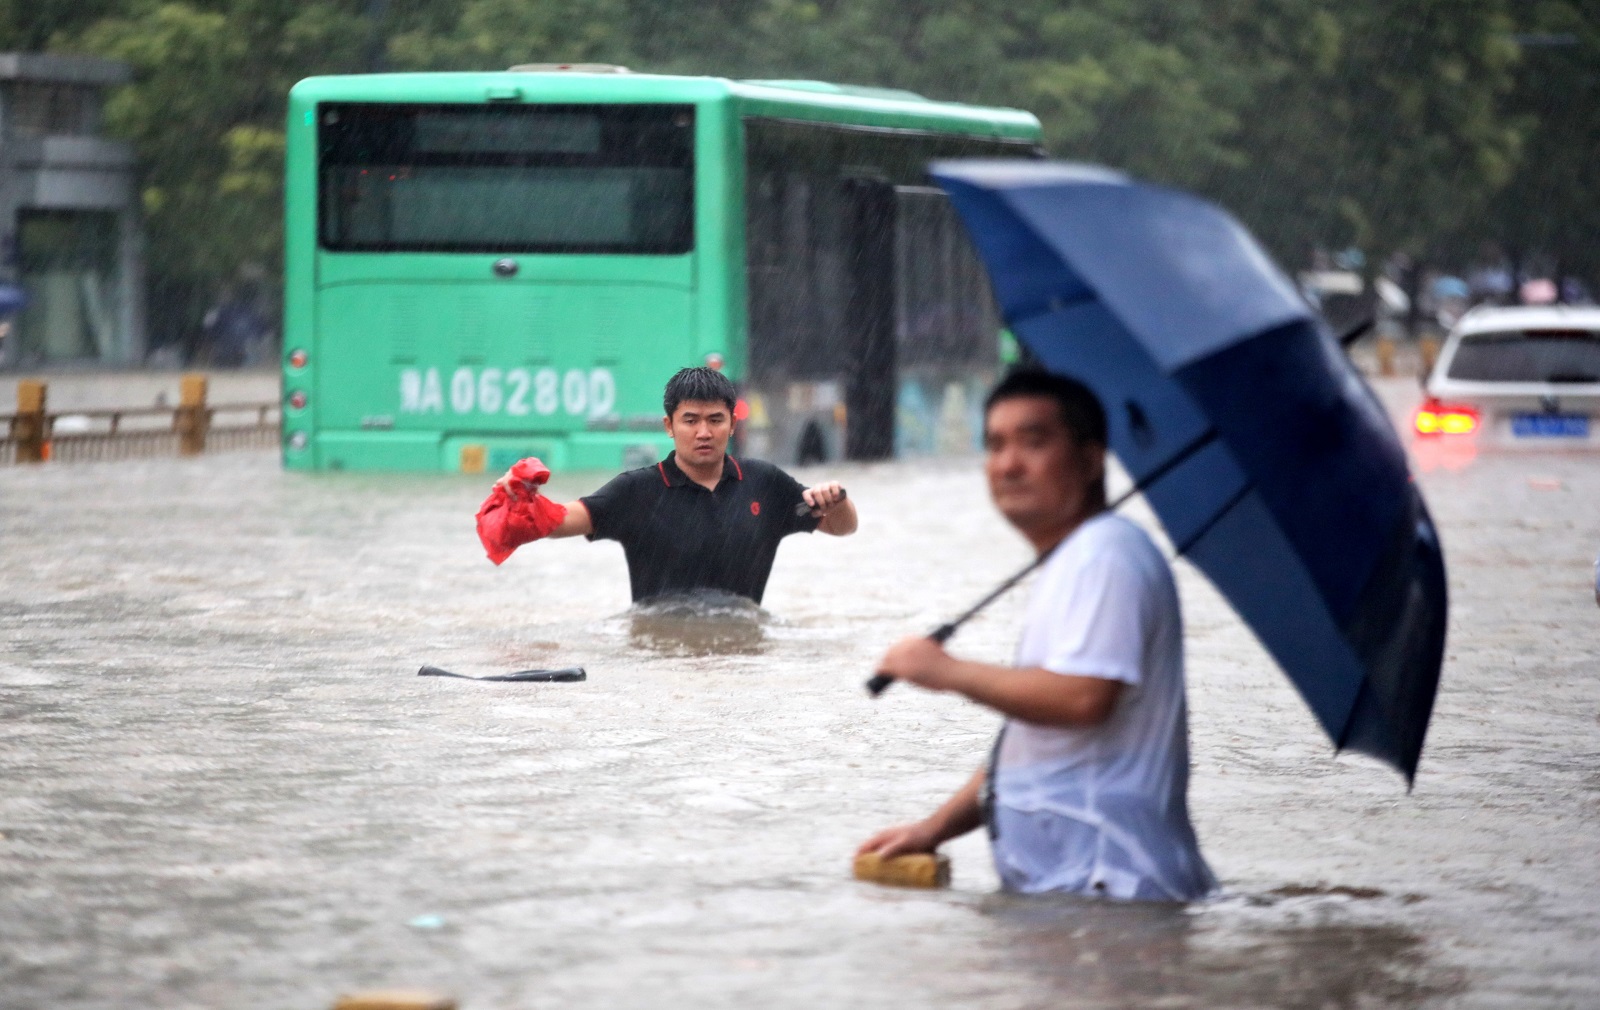 epa09356176 People walk in the flooded road after record downpours in Zhengzhou city in central China's Henan province Tuesday, July 20, 2021 (issued 21 July 2021). Heavy floods in Central China killed 12 in Zhengzhou city due to the rainfall yesterday, 20 July 2021, according to official Chinese media. Over 144,660 people have been affected by heavy rains in Henan Province since July 16, and over 10,000 had to be relocated, the provincial flood control and drought relief headquarters said Tuesday.  EPA/FEATURECHINA CHINA OUT